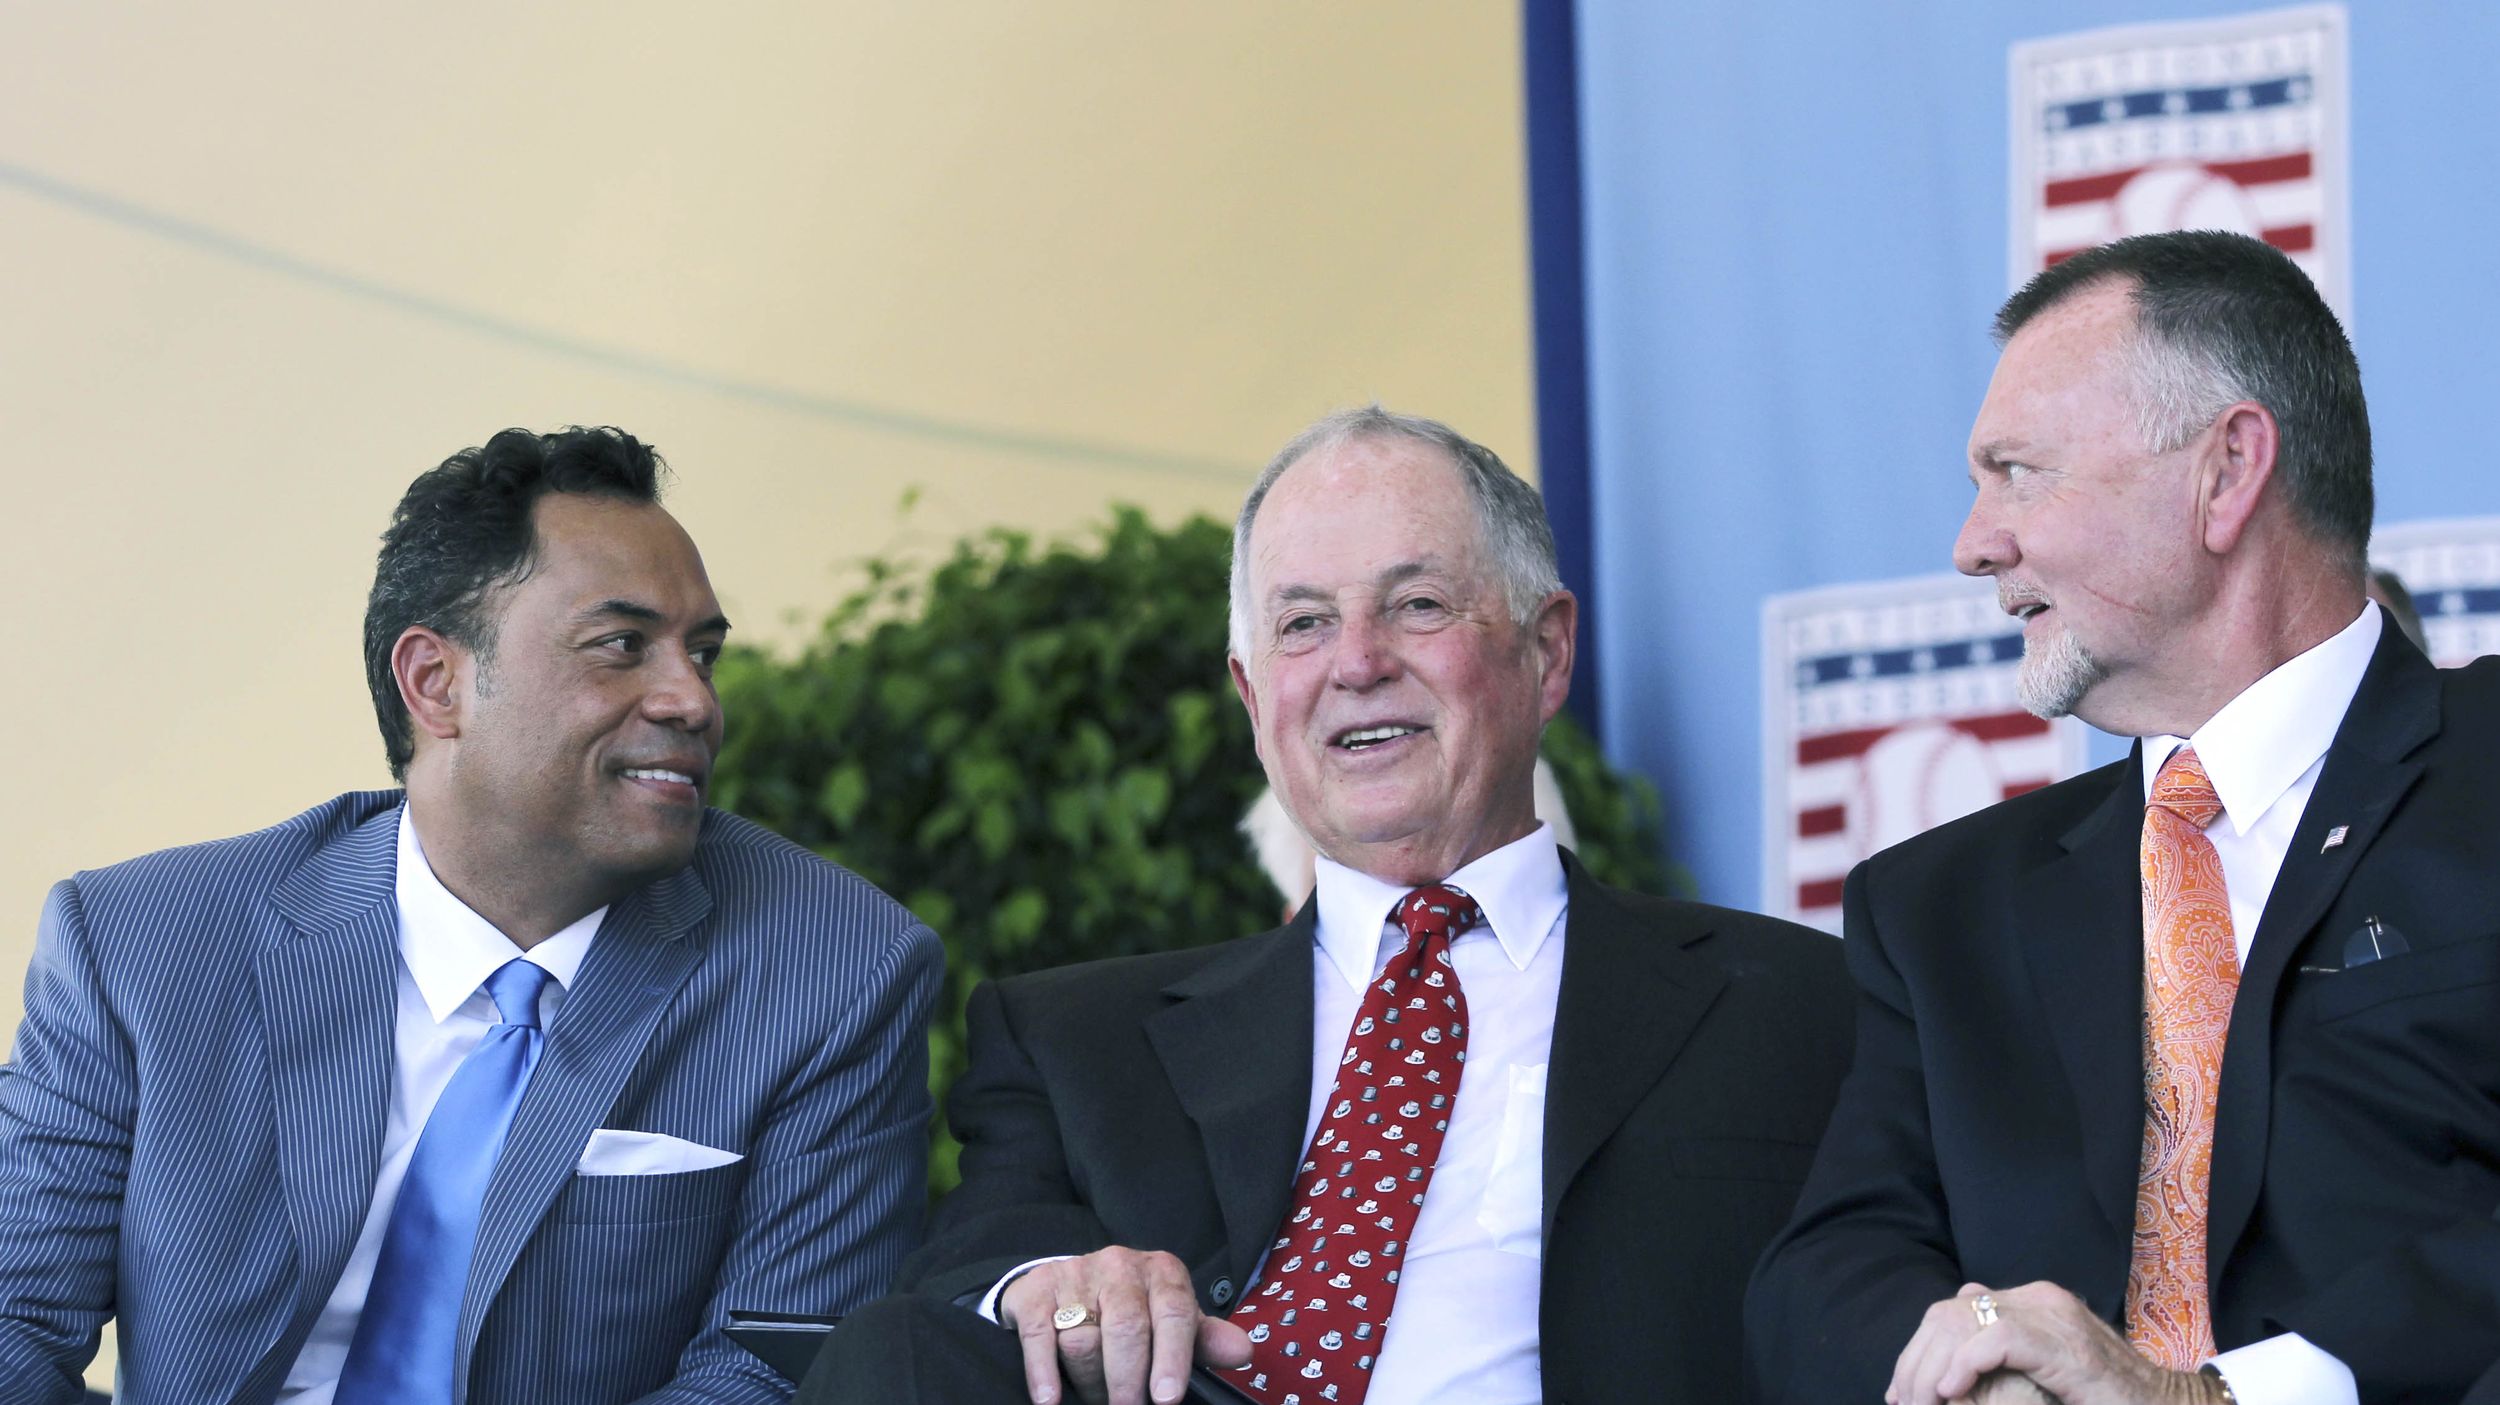 Blyleven and former Toronto Blue Jays infielder Alomar elected to